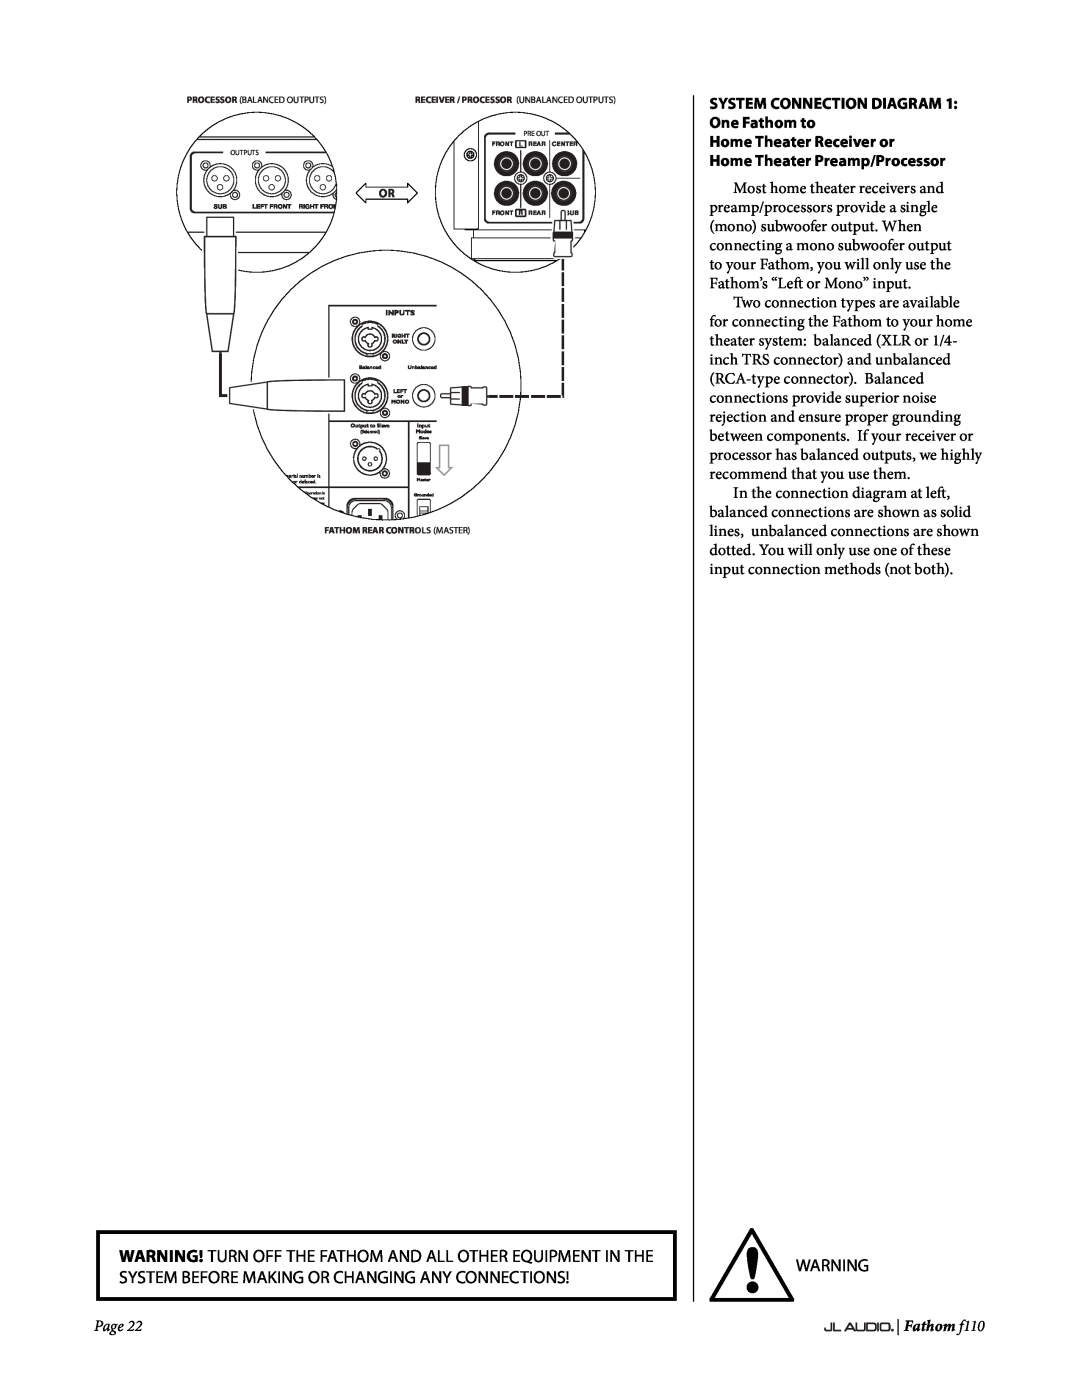 JL Audio f110 SYSTEM CONNECTION DIAGRAM 1 One Fathom to, Home Theater Receiver or, Home Theater Preamp/Processor, Page 